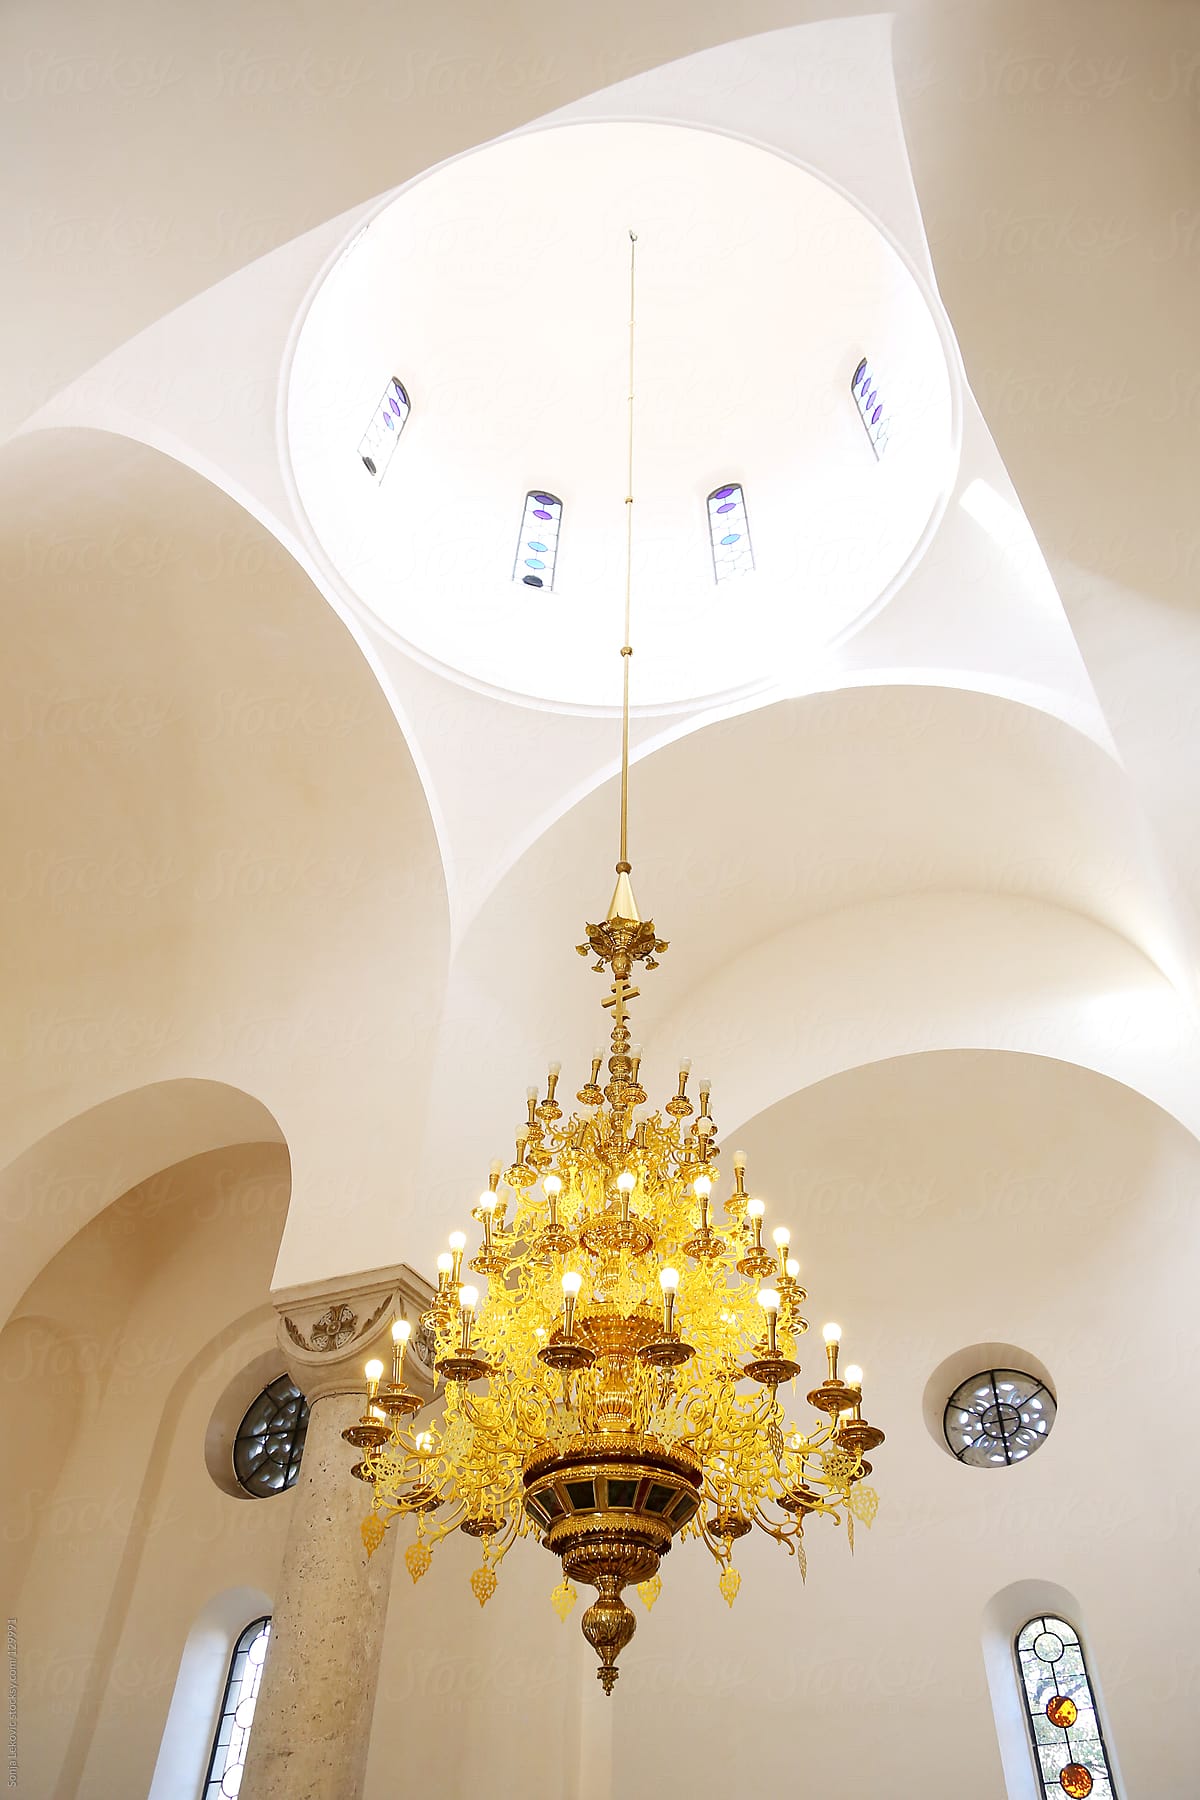 church ceiling with chandelier